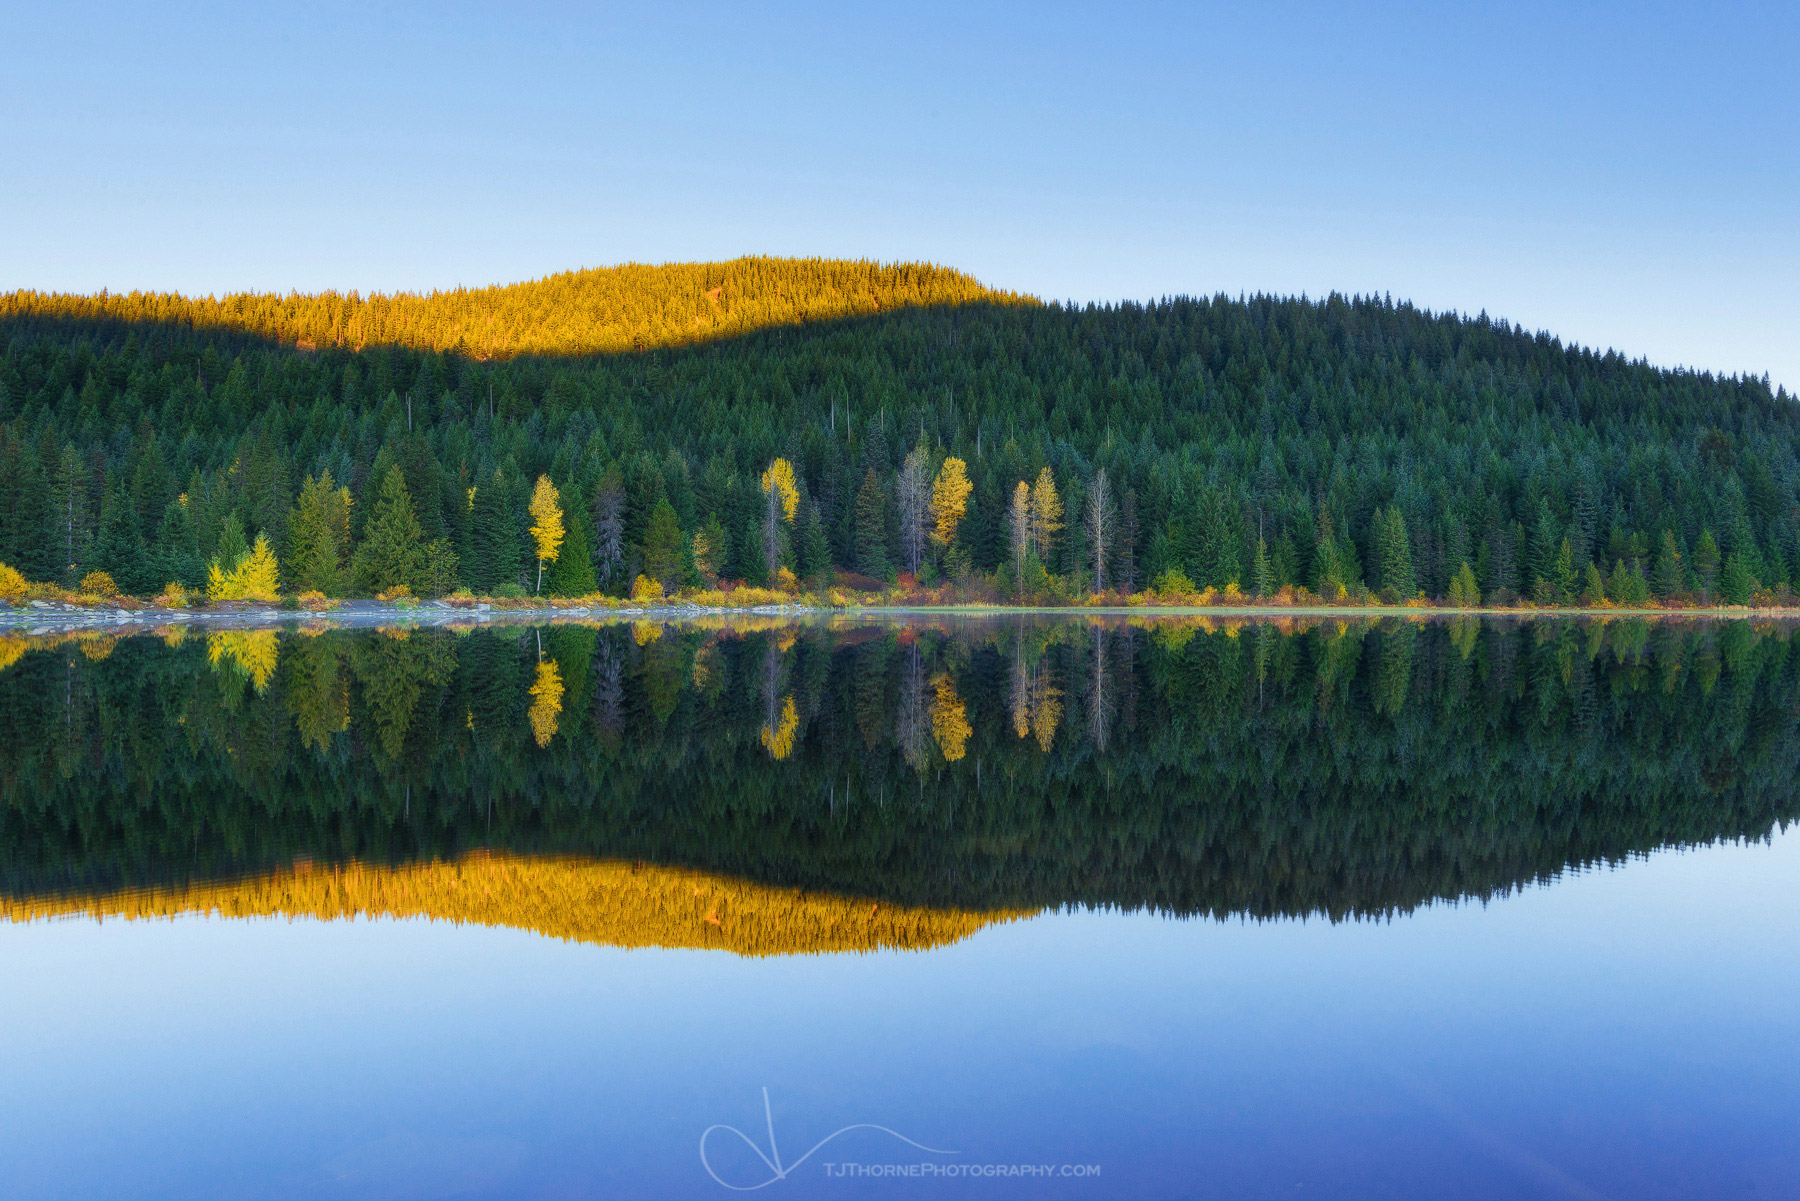 Sunrise light and autumn colors reflected in the waters Trillium Lake, Oregon.